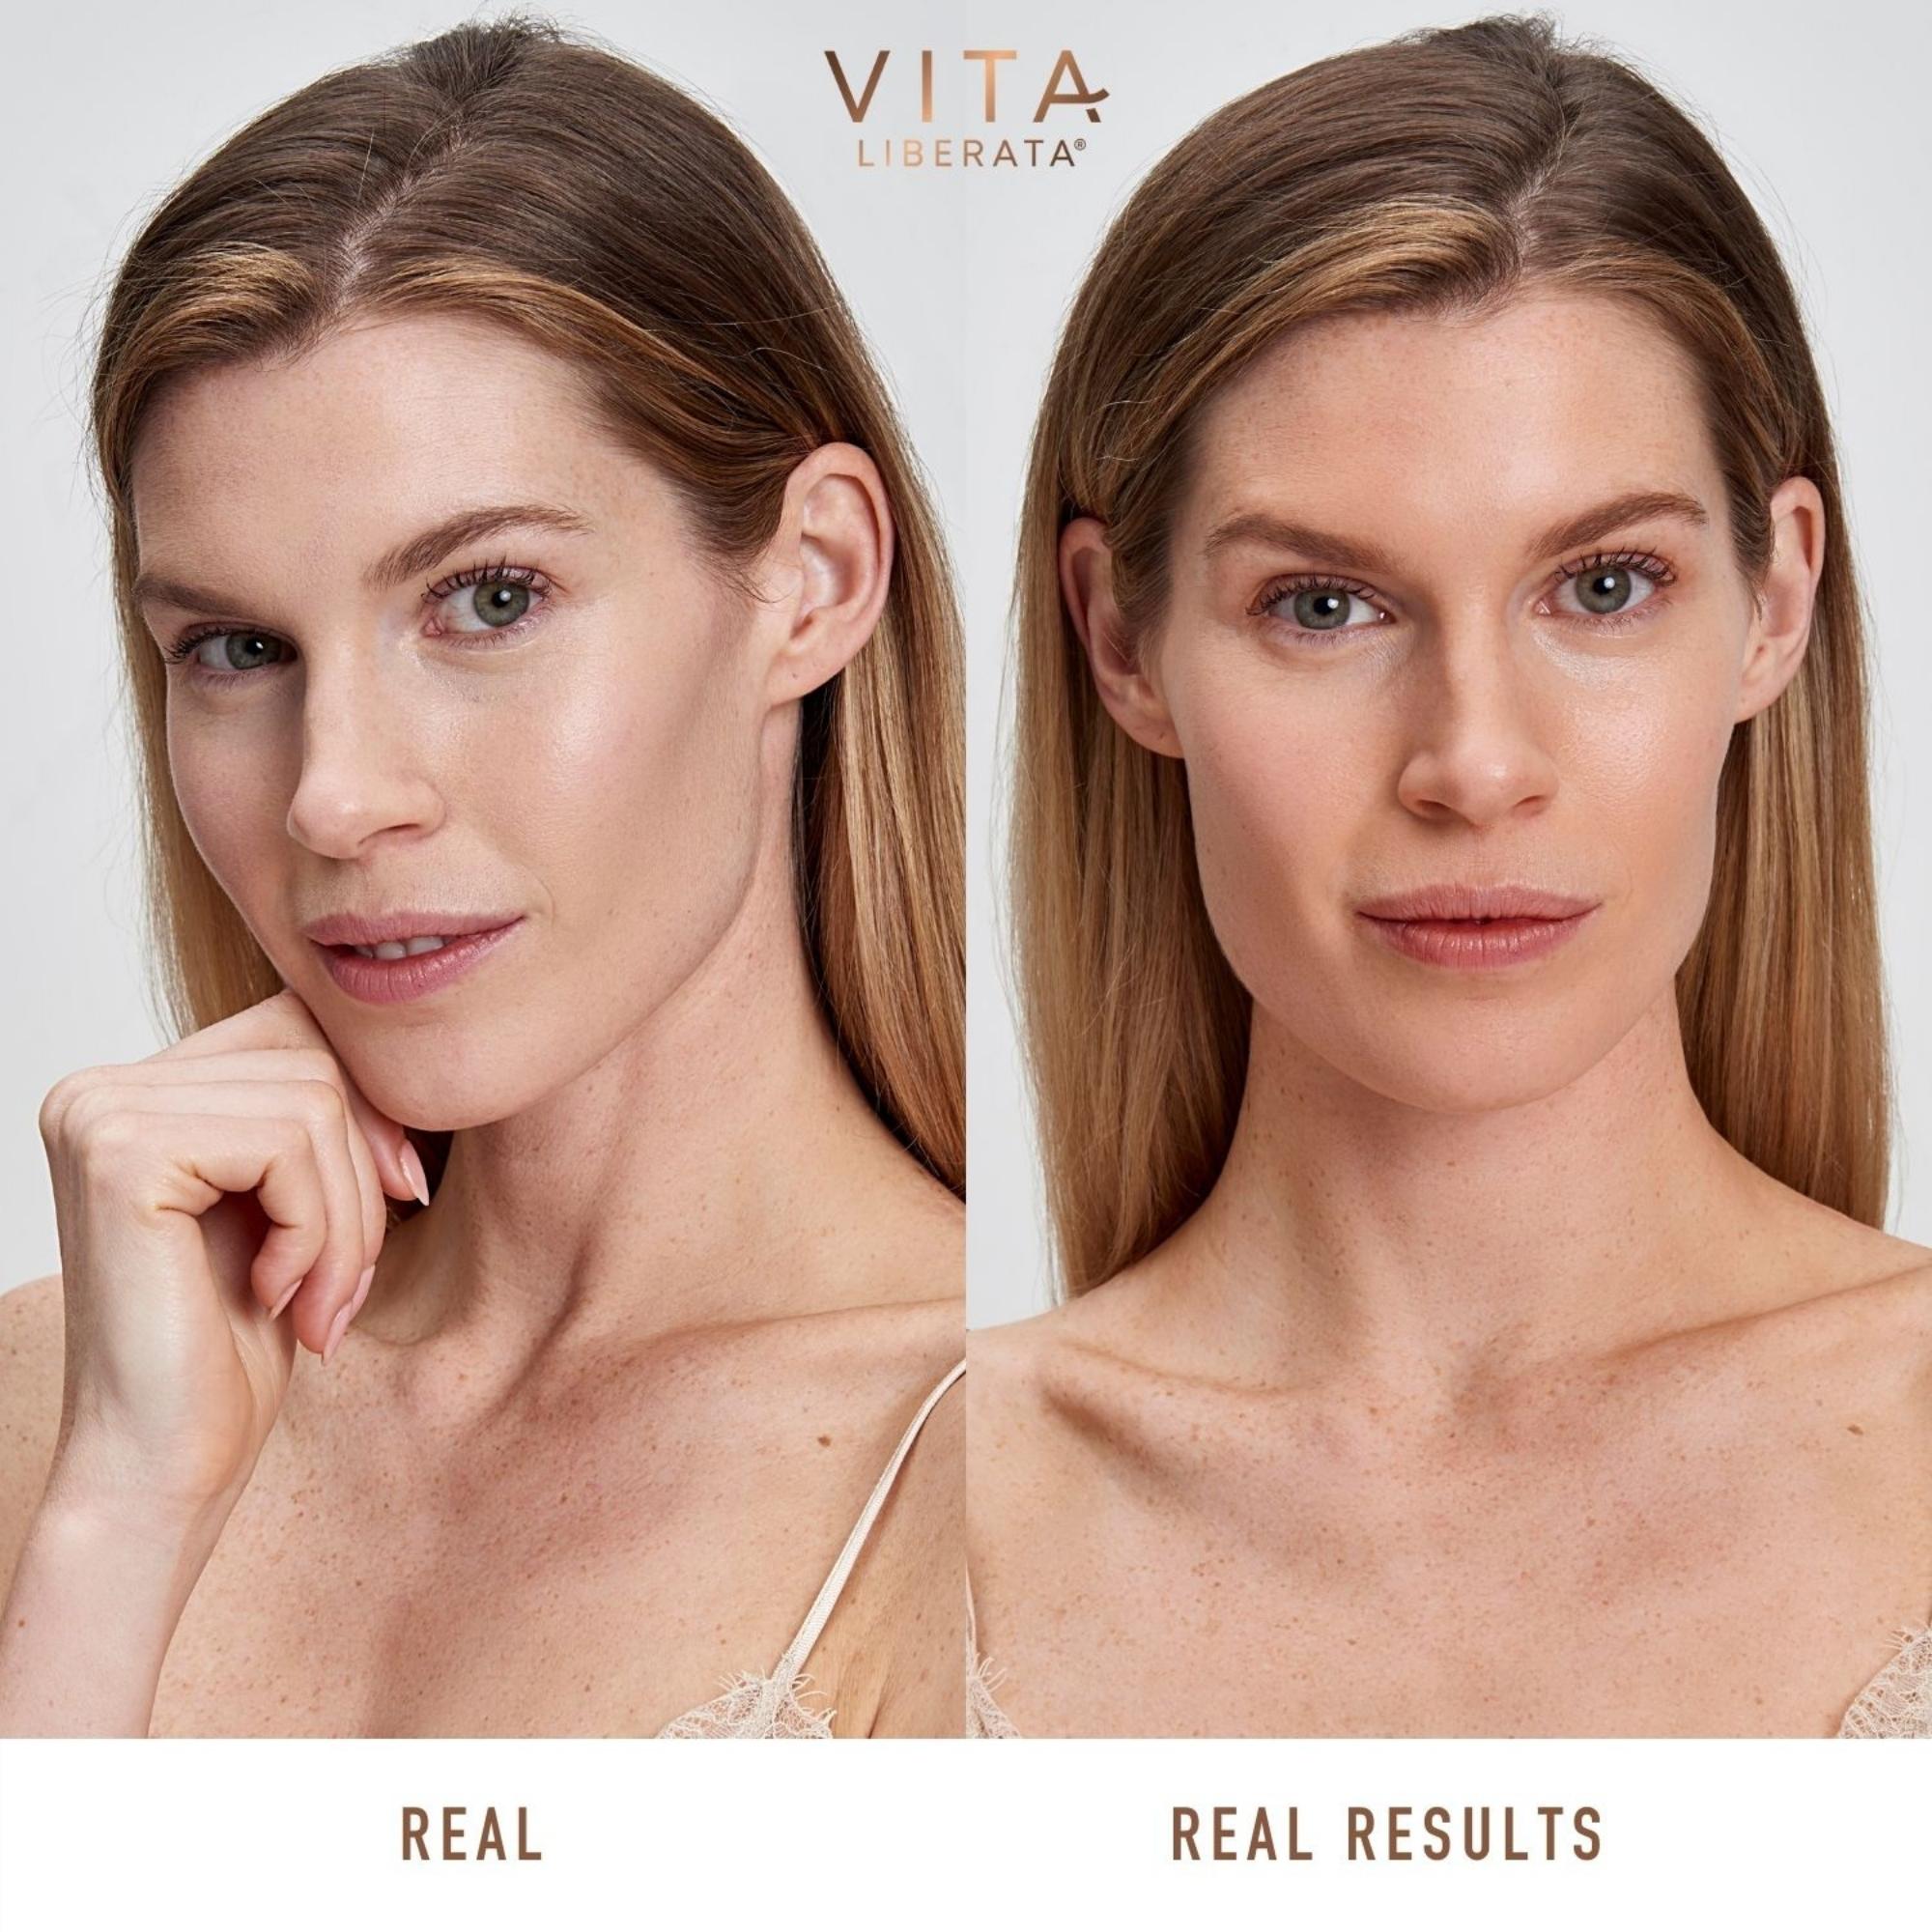 Real and Real Results before and after